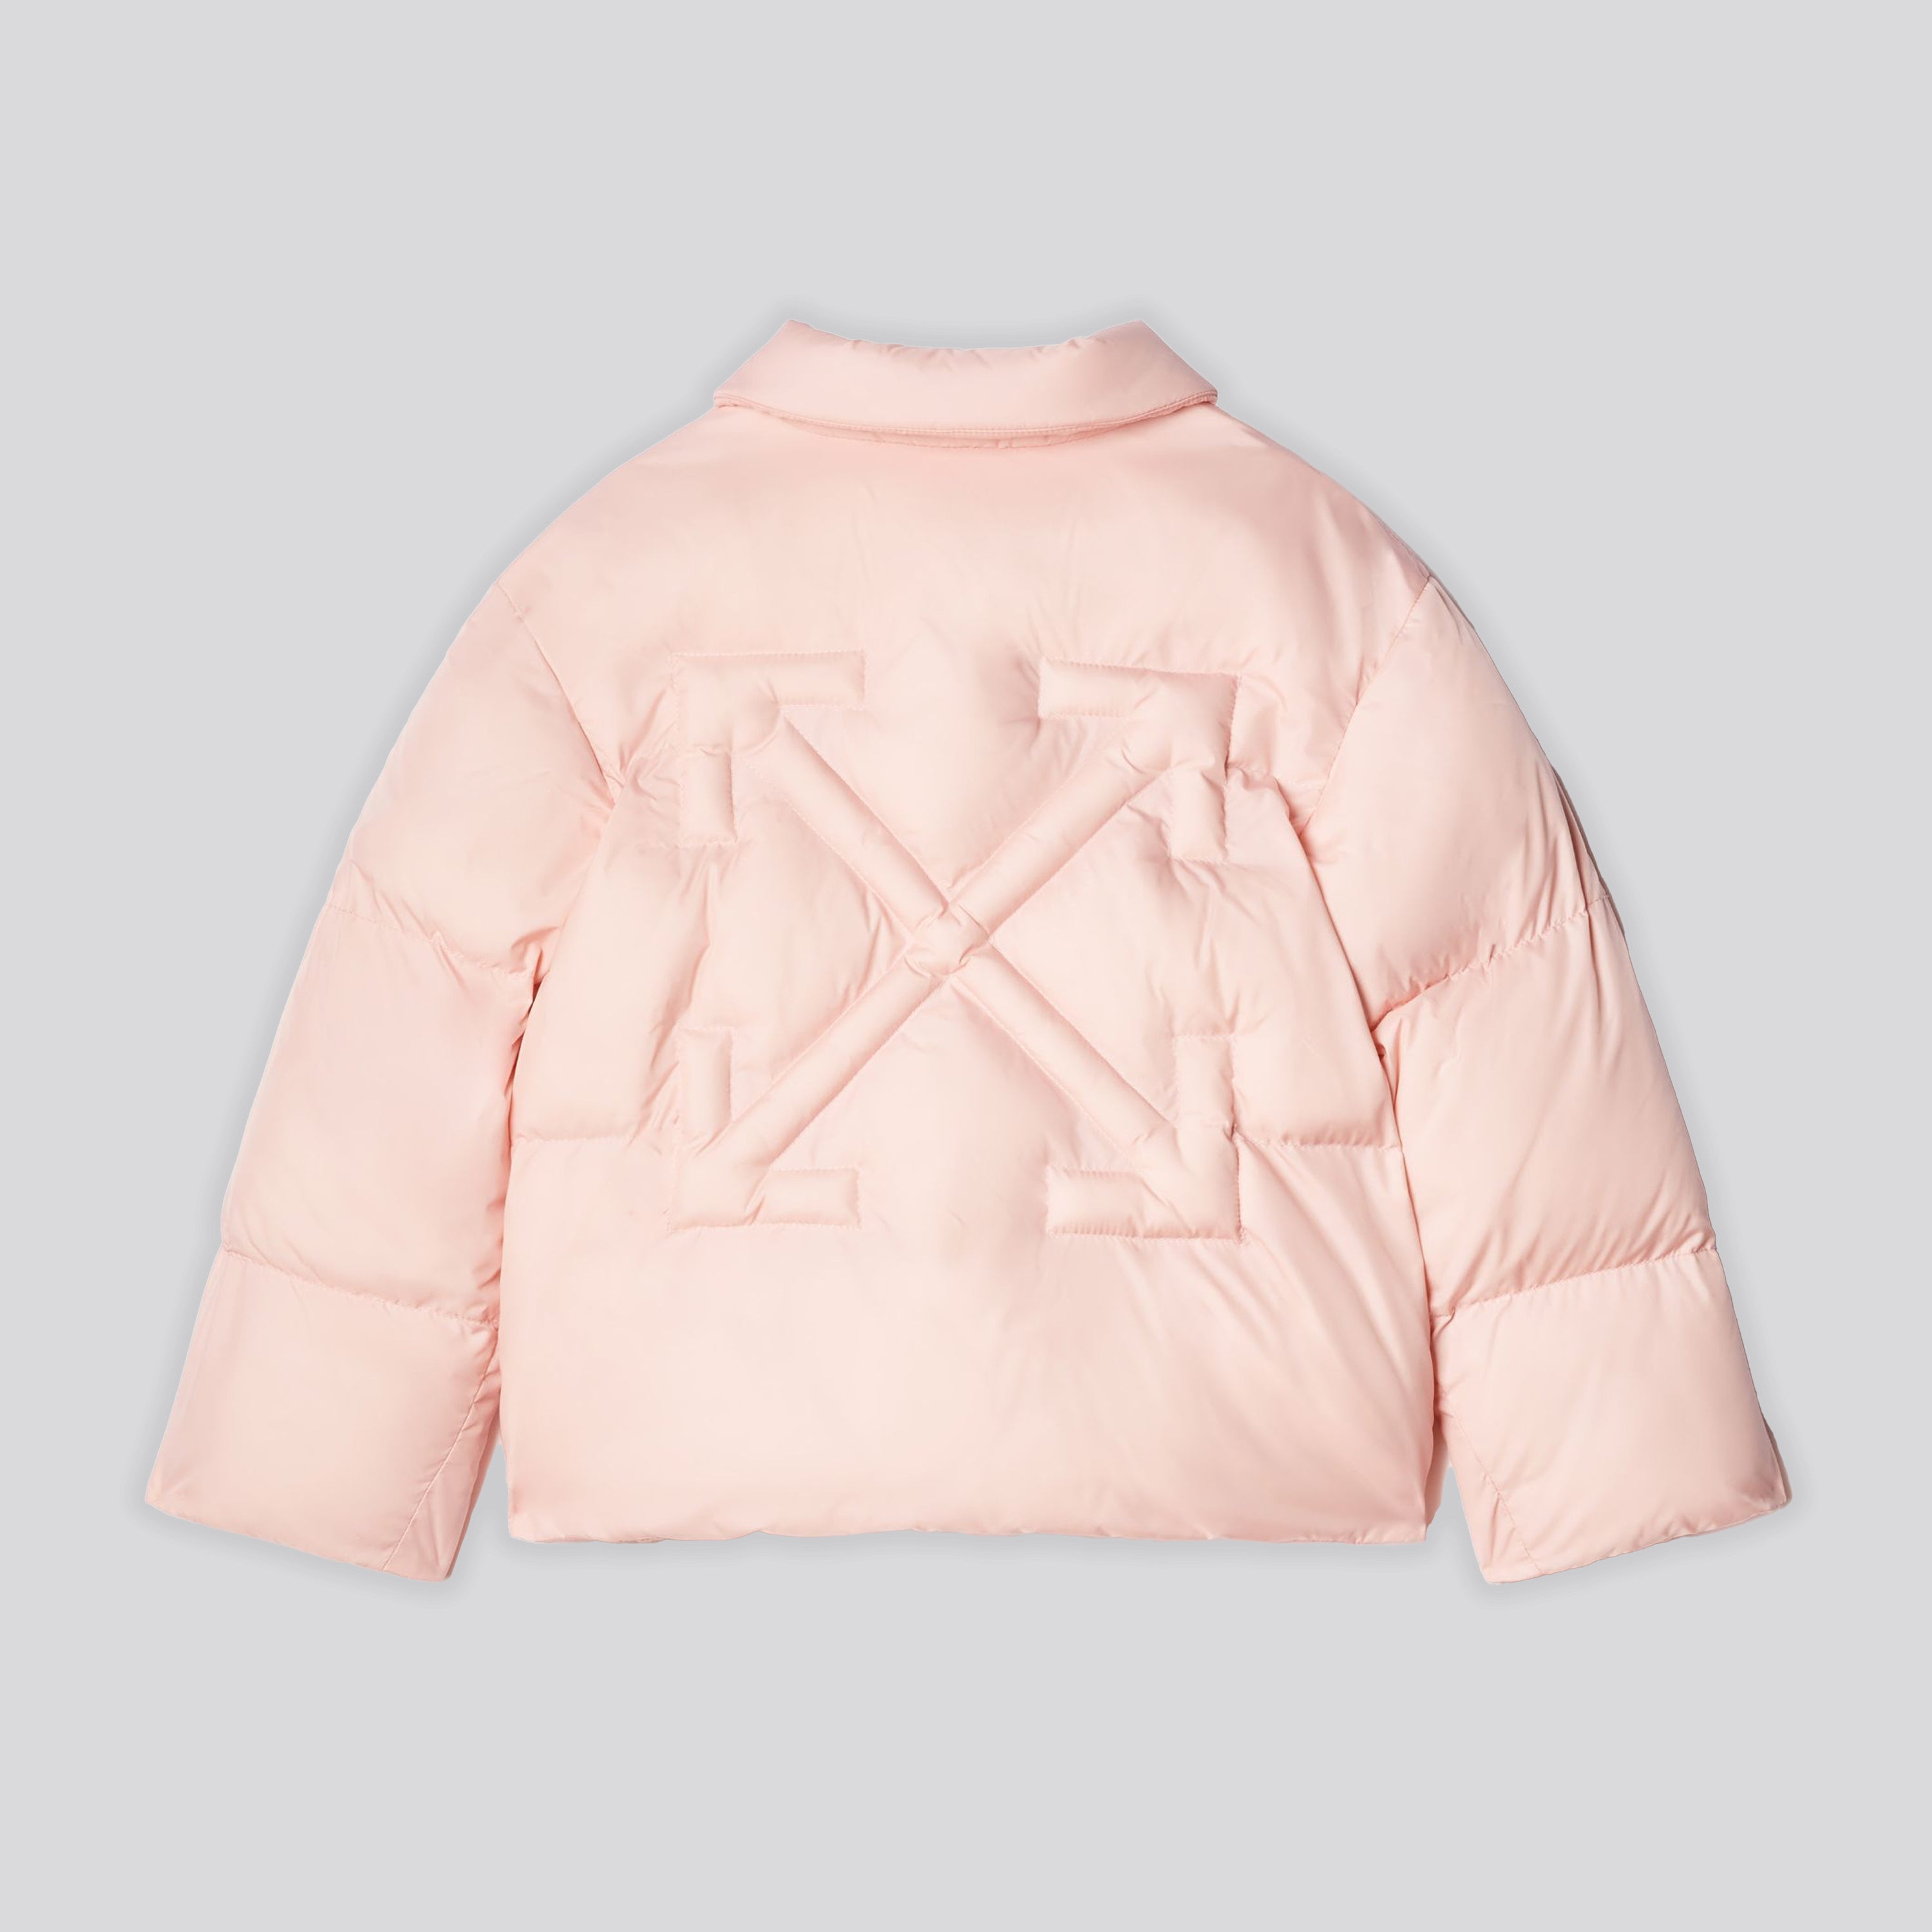 Chaqueta Rosado Off-White Kids Arrow Quilted